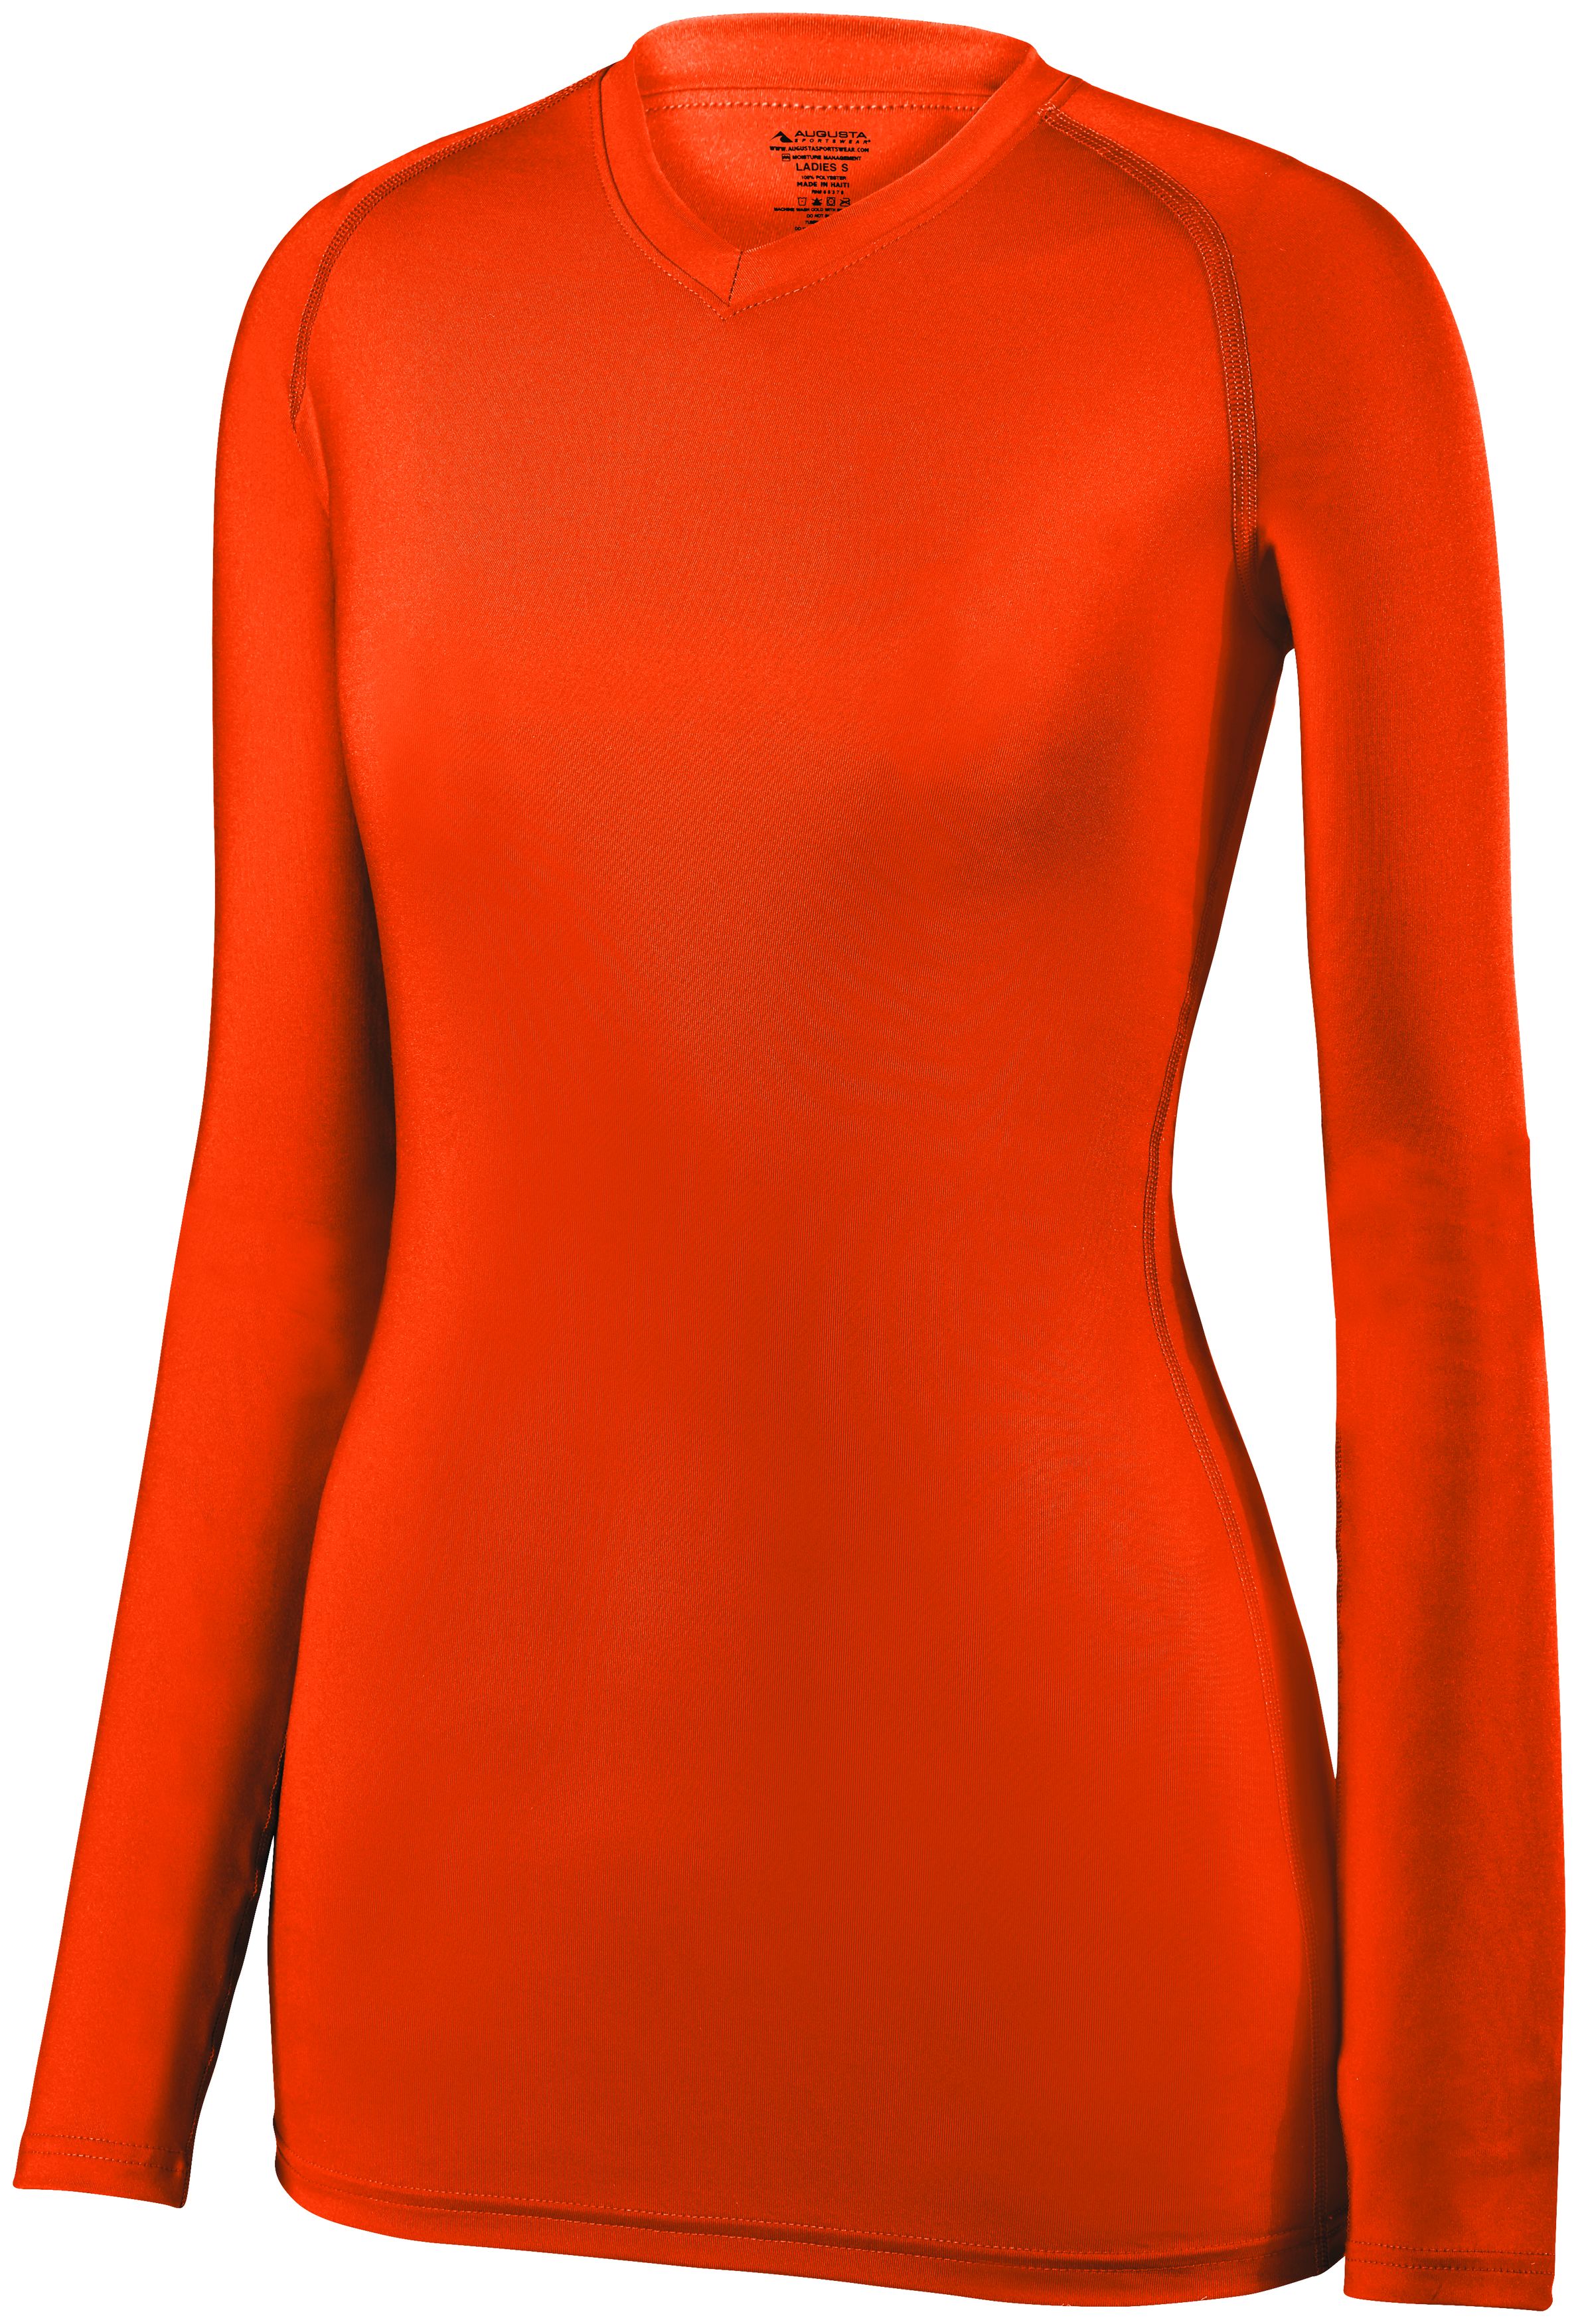 High 5 Ladies Maven Jersey in Orange  -Part of the Ladies, Ladies-Jersey, High5-Products, Volleyball, Shirts product lines at KanaleyCreations.com